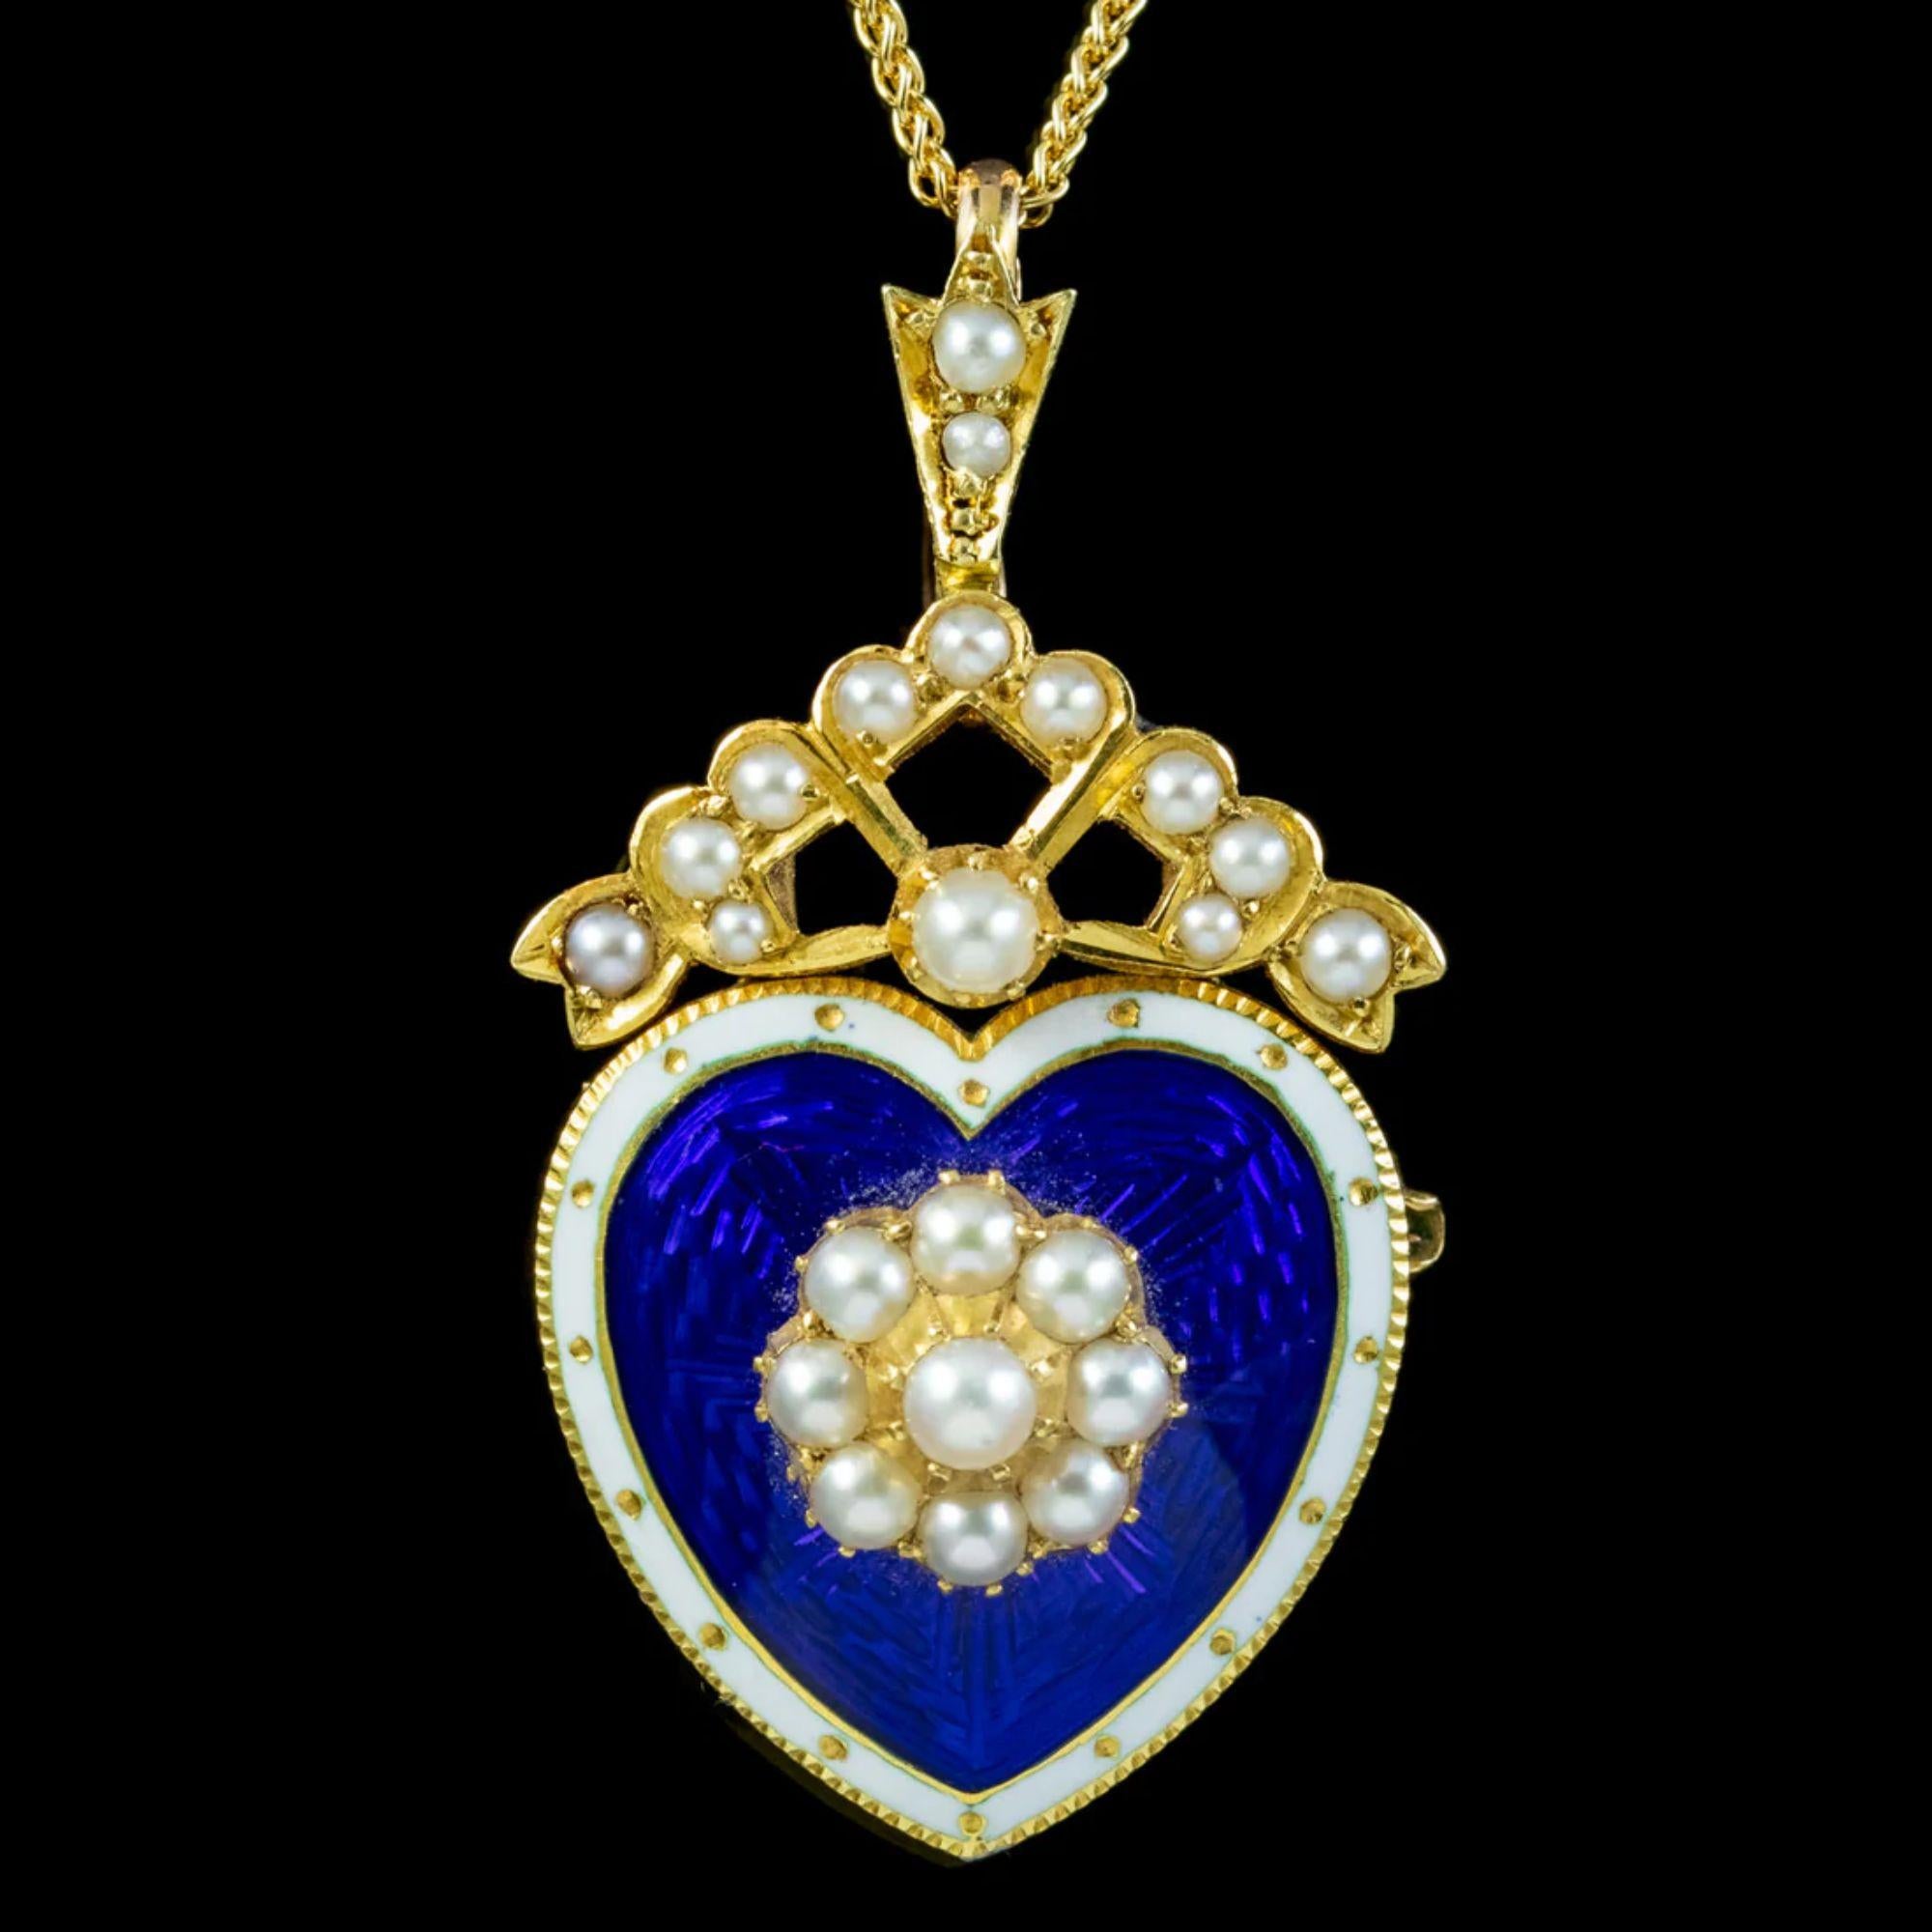 Bead Edwardian Pearl Heart Pendant Necklace in 18Ct Gold Blue Enamel, circa 1901-1910 For Sale